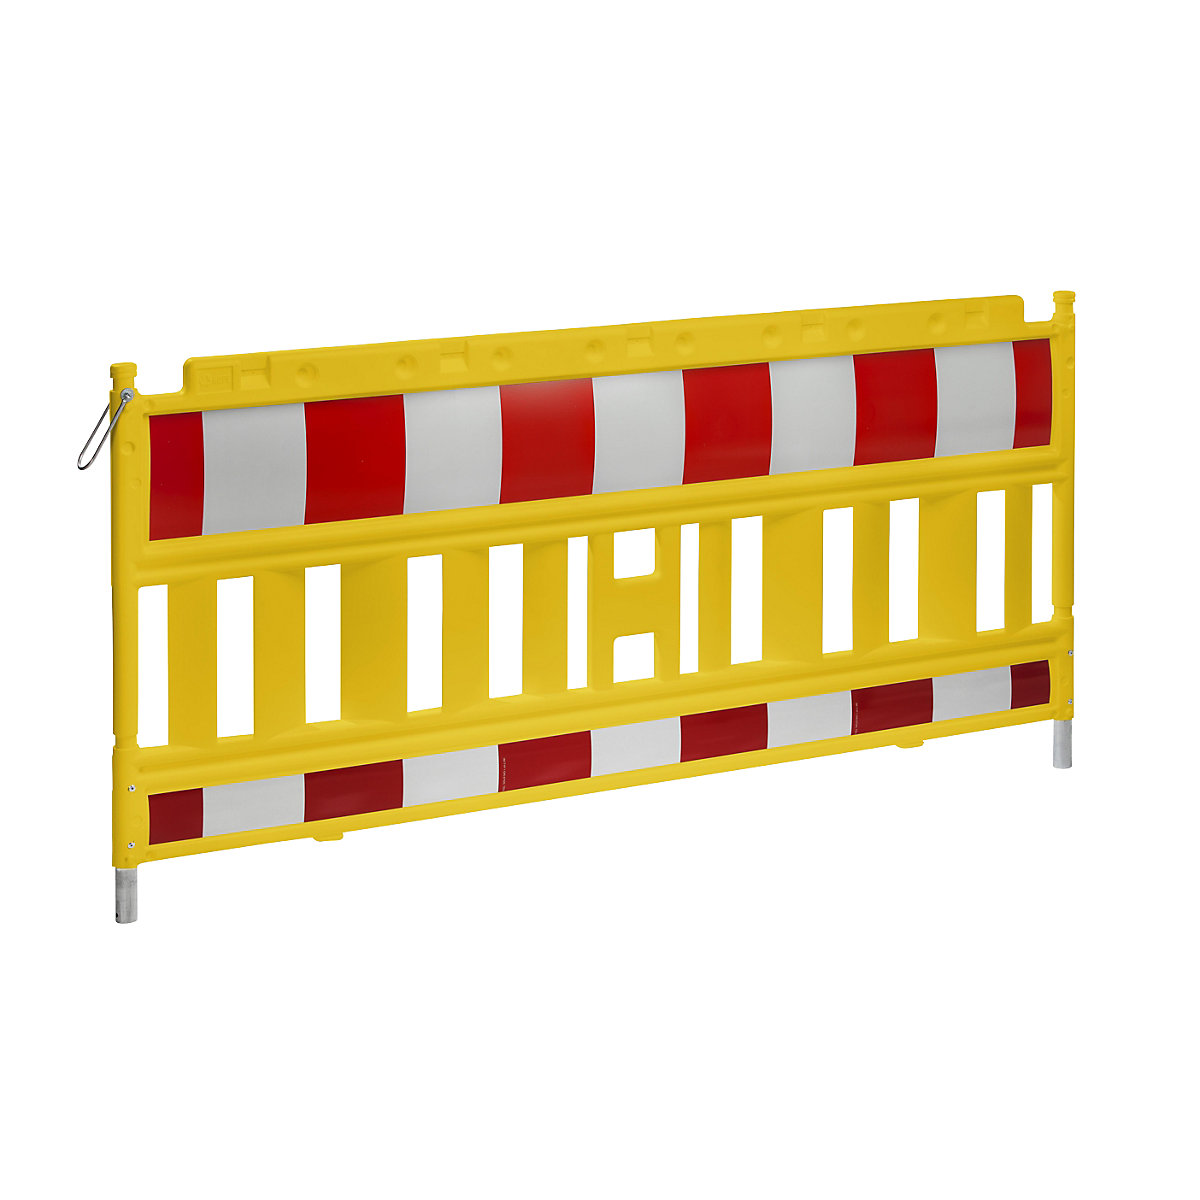 Plastic barrier fencing with reflective film